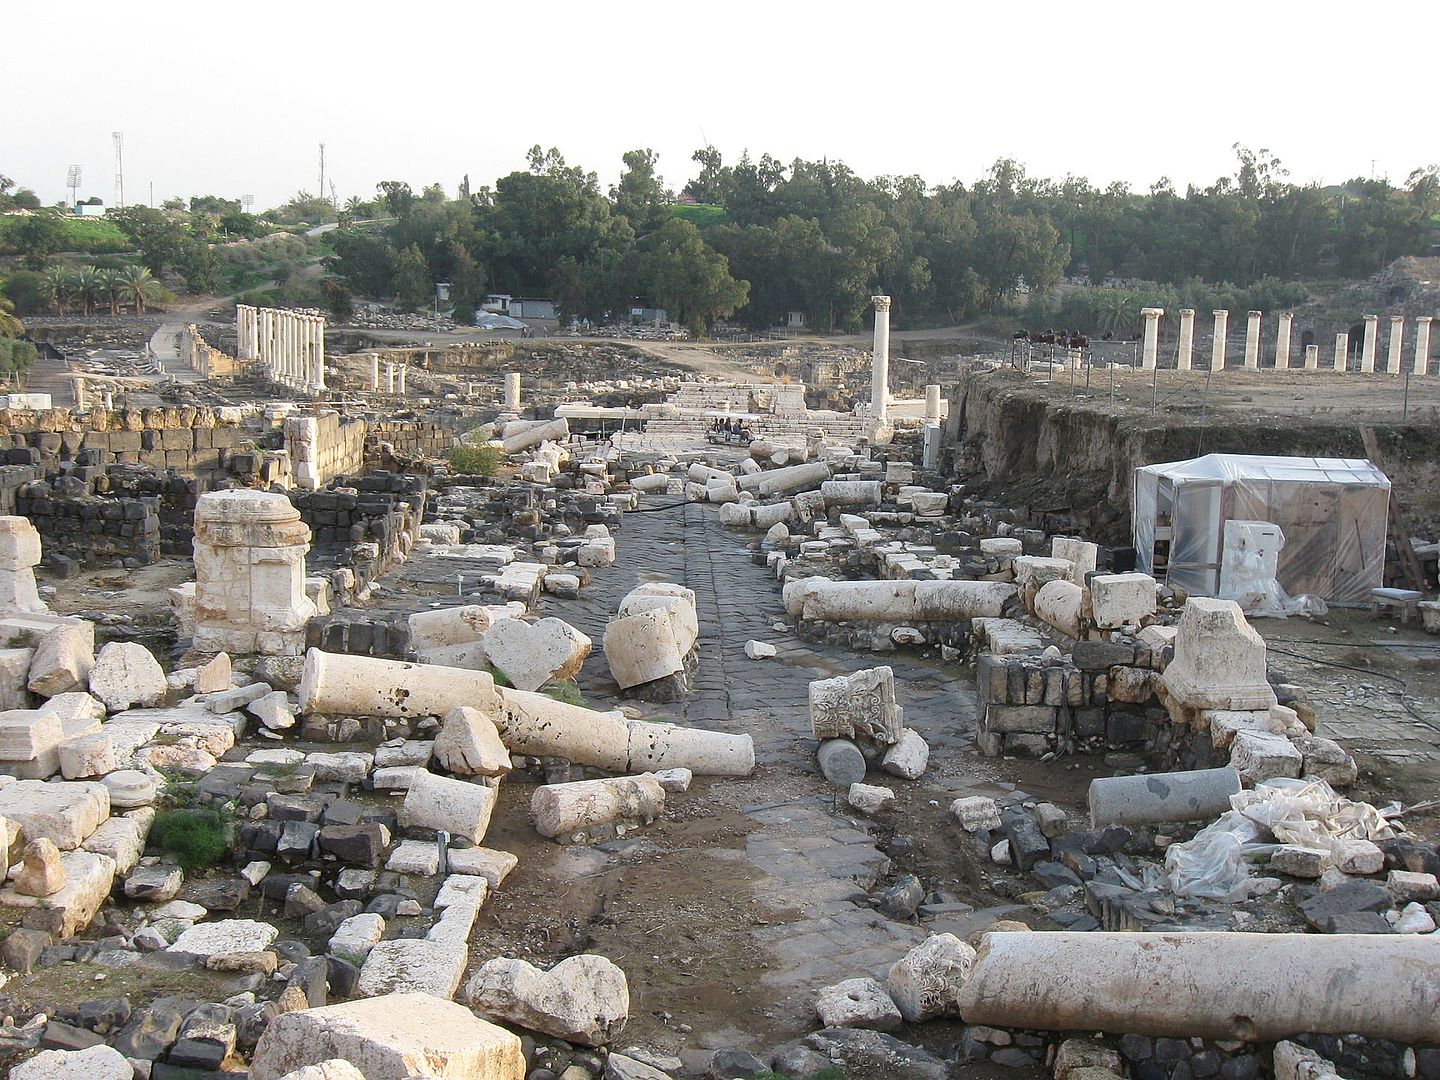 The city of Scythopolis (Beit She'an), a city destroyed by this earthquake.